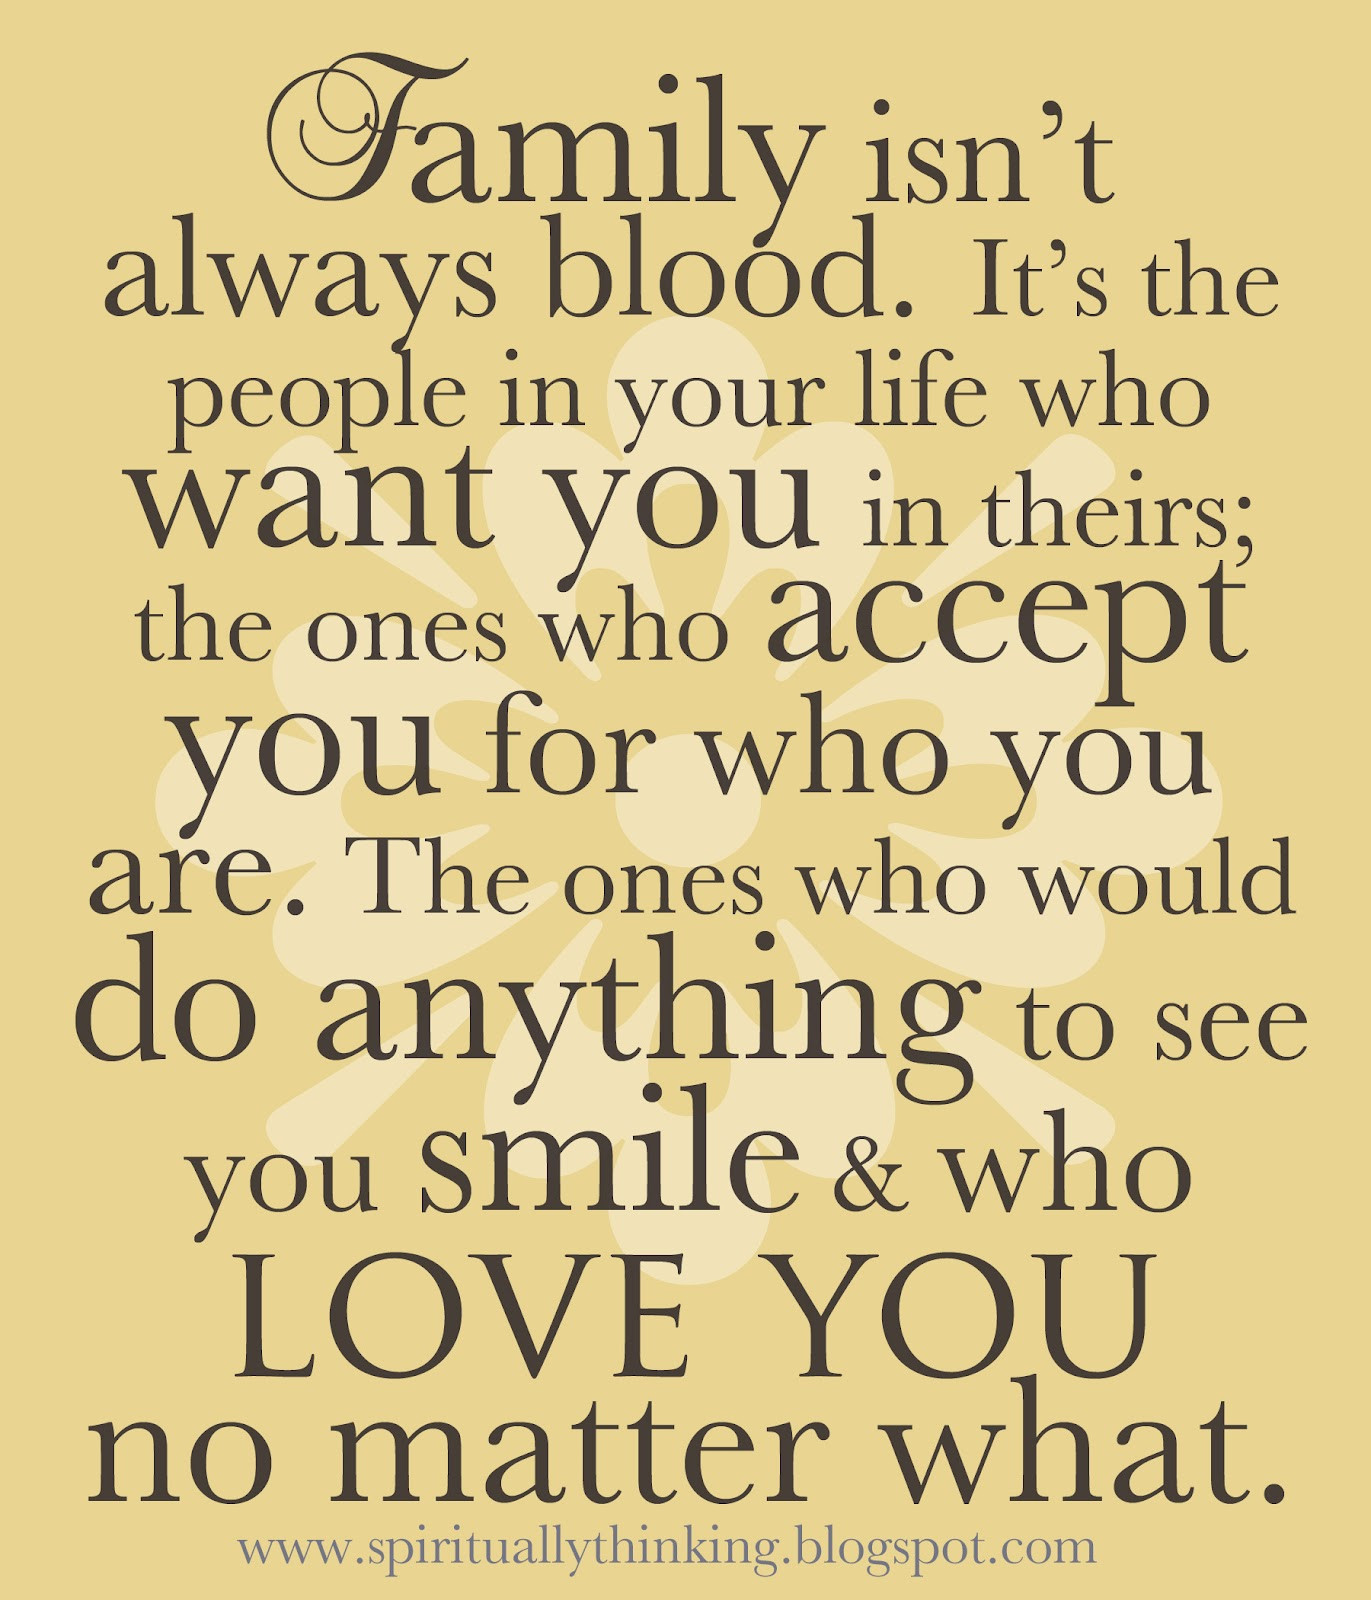 Friends Becoming Family Quotes
 Quotes About Friends Being Family QuotesGram